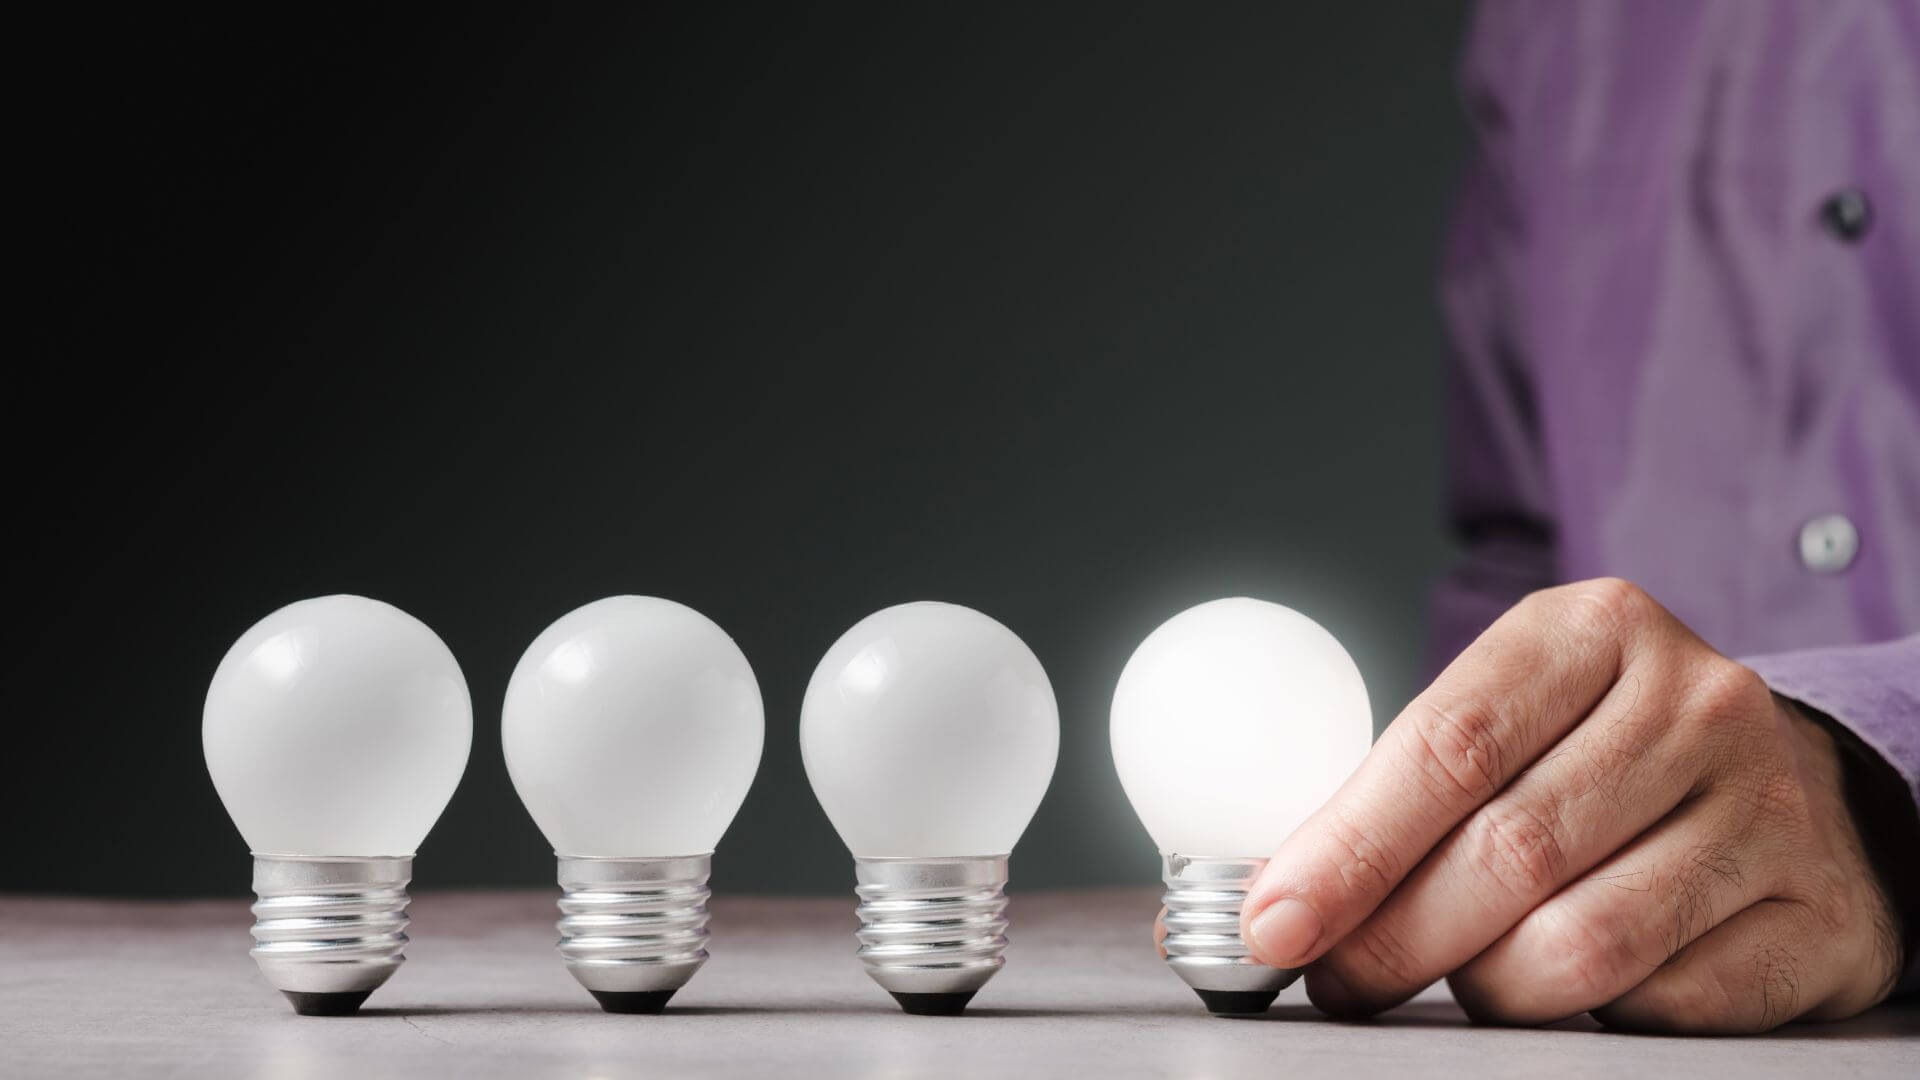 selecting the brightest bulb